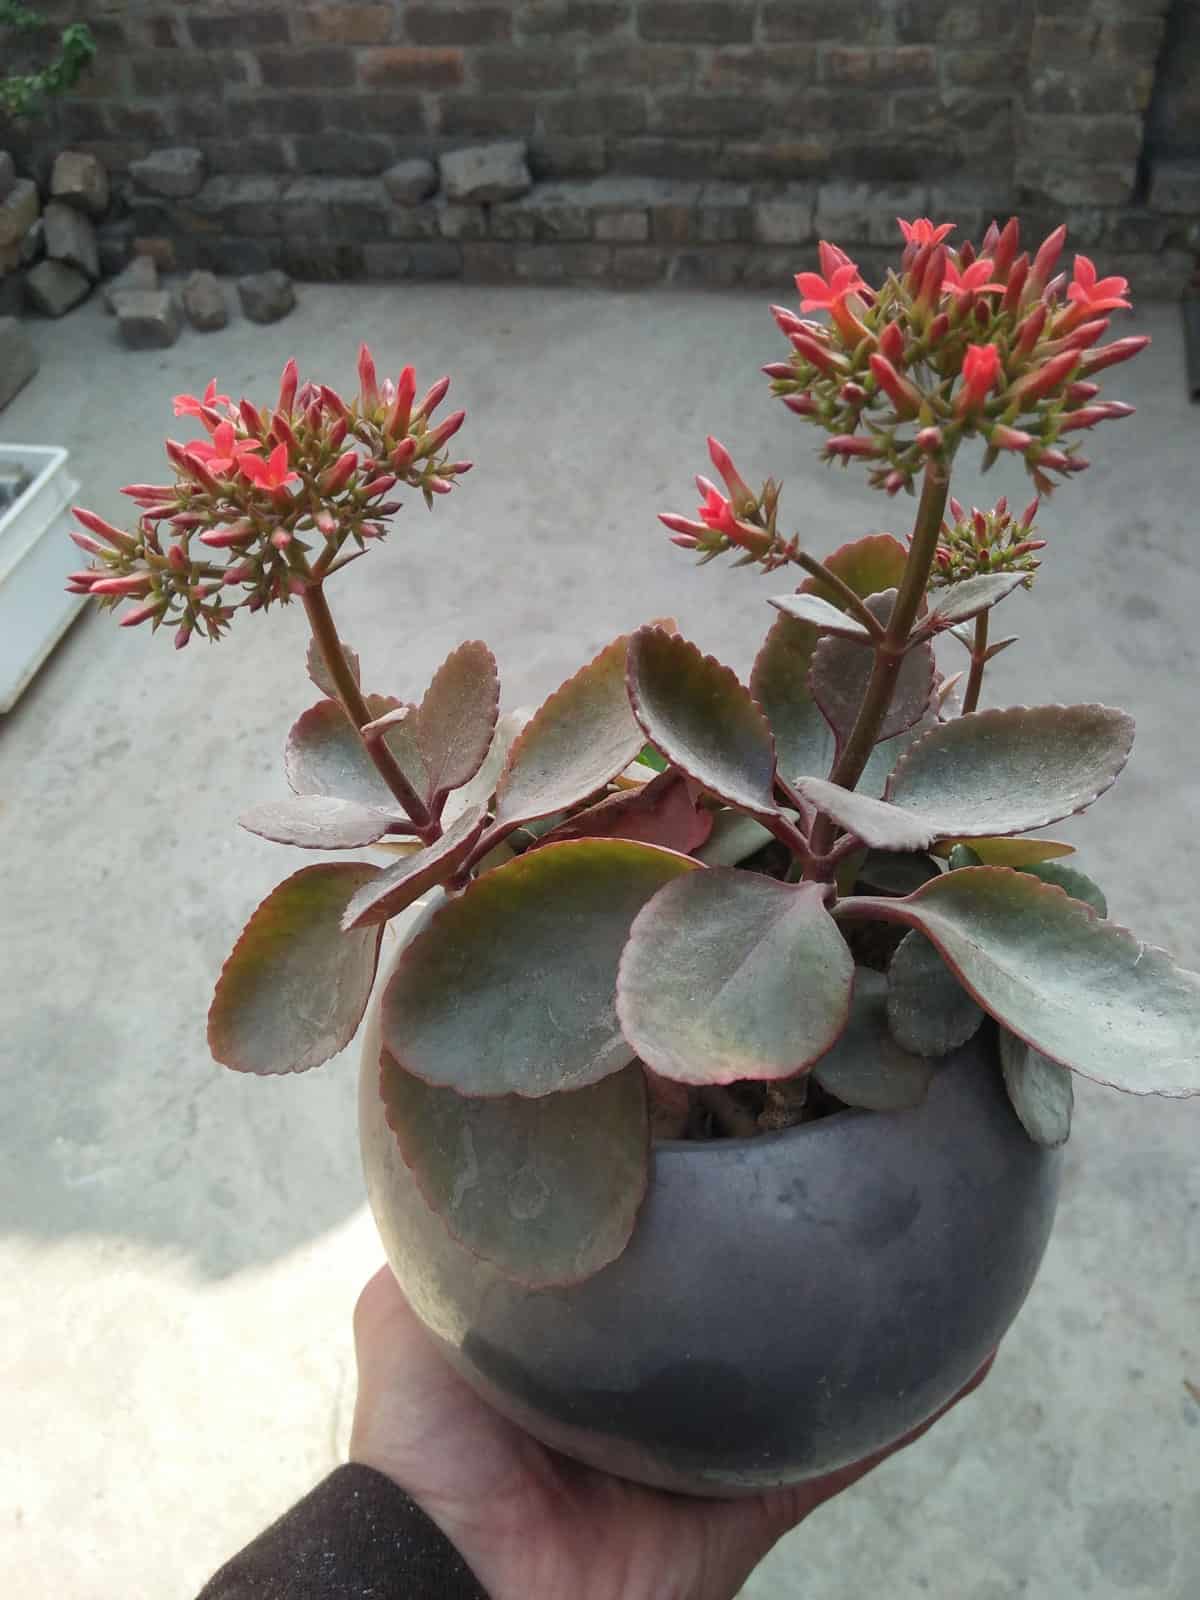 Bright red petals of a Kalanchoe succulent planted on a round pot